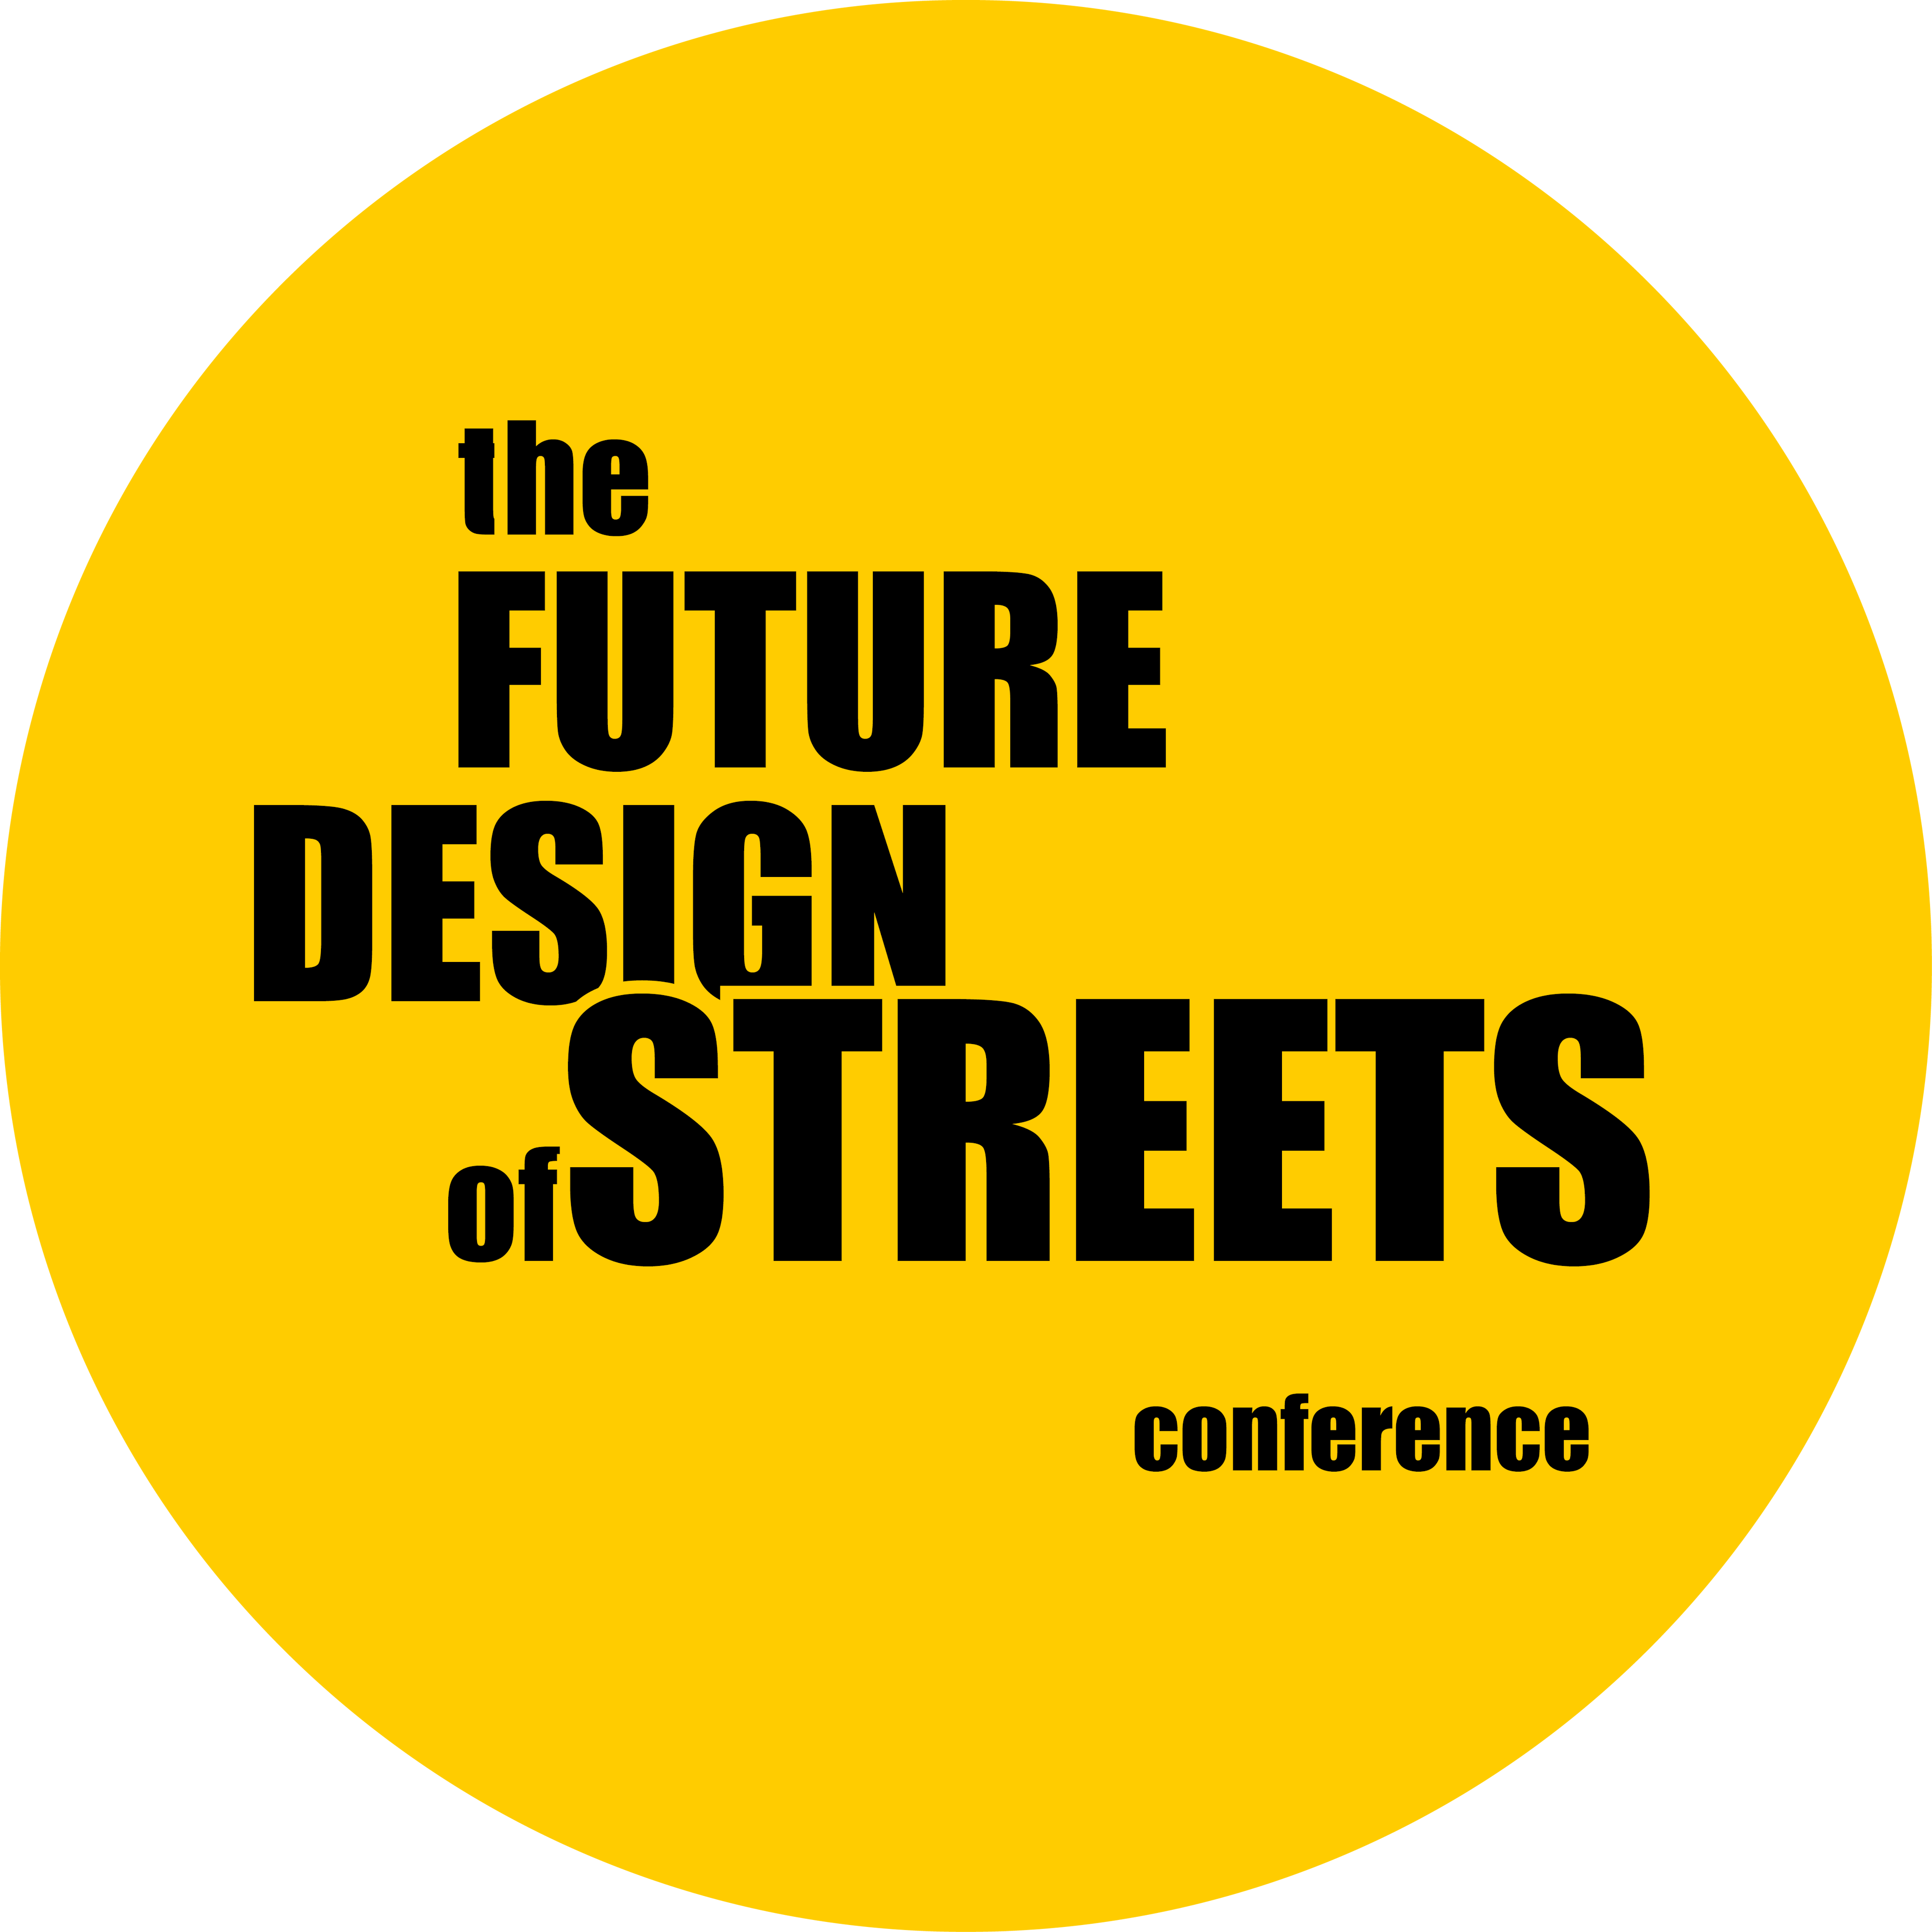 1st International Conference The Future Design of Streets image